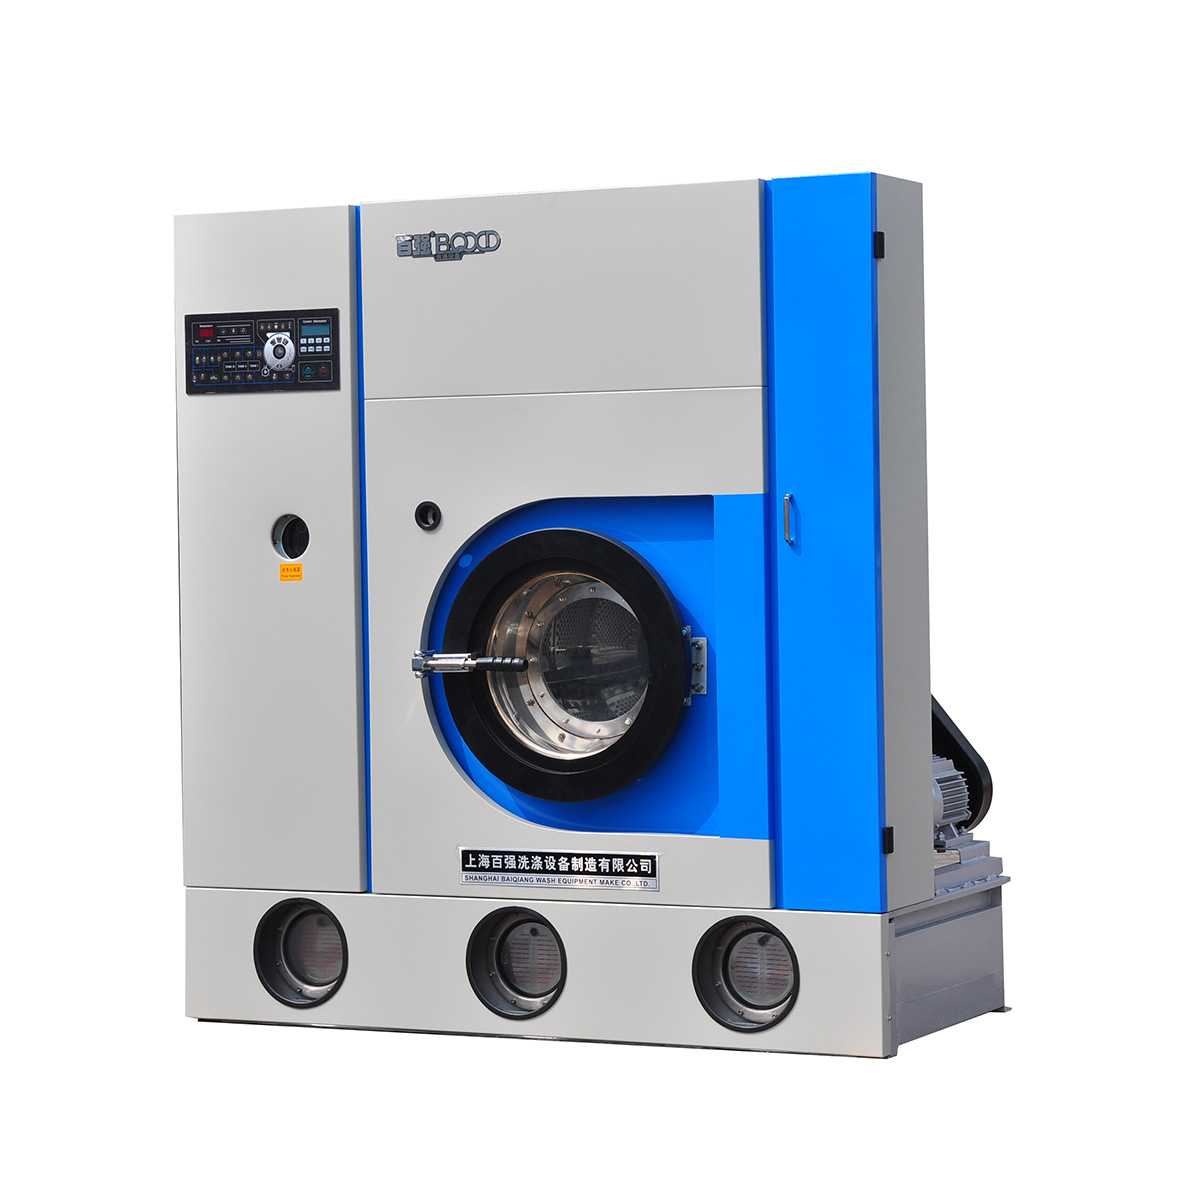 P series closed dry-cleaning machines